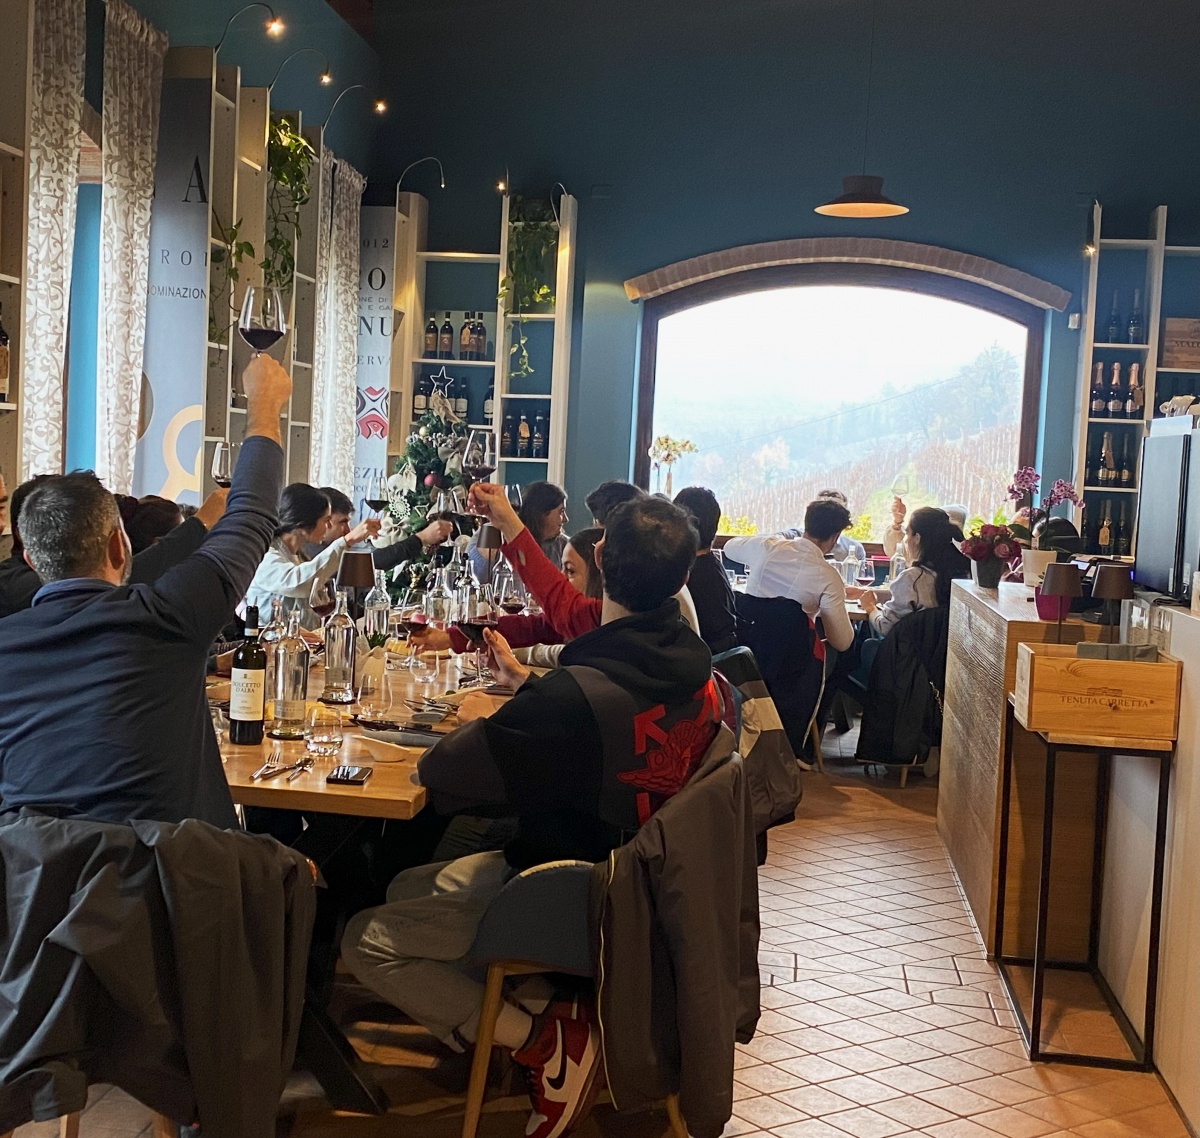 Bip organizes with Smart Events an incentive trip in the Langhe - 8